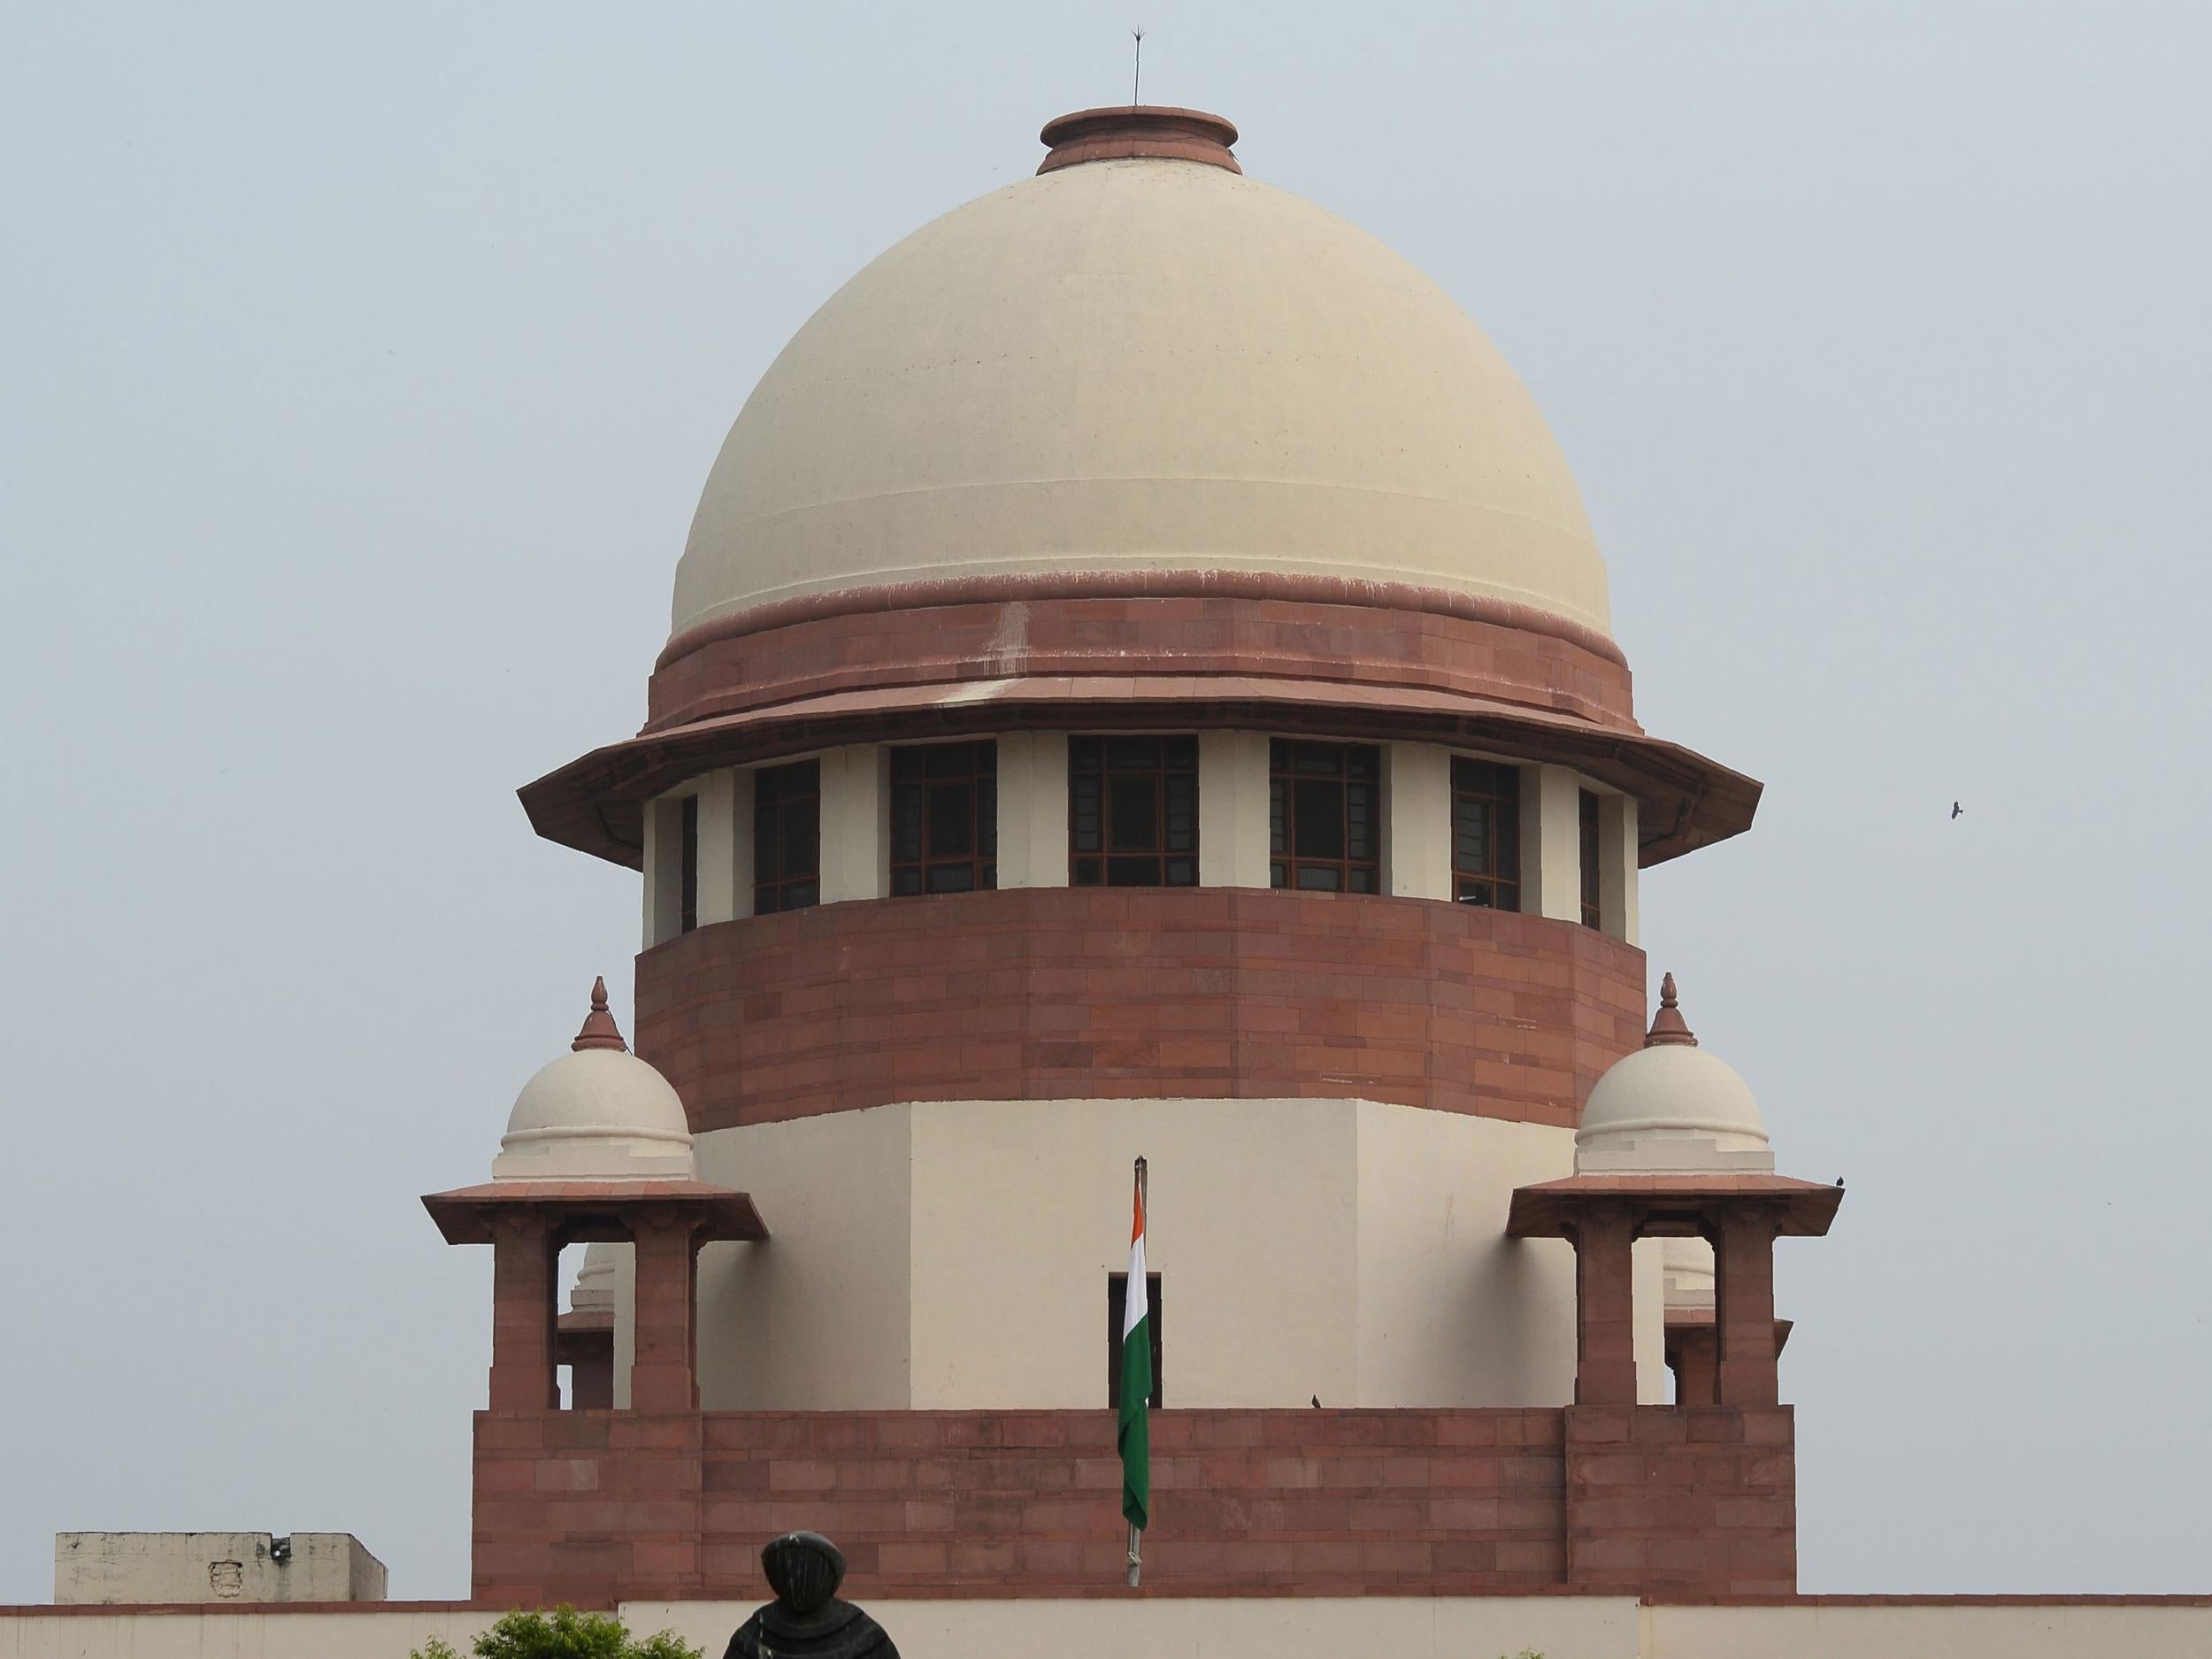 The Indian Supreme Court building in New Delhi